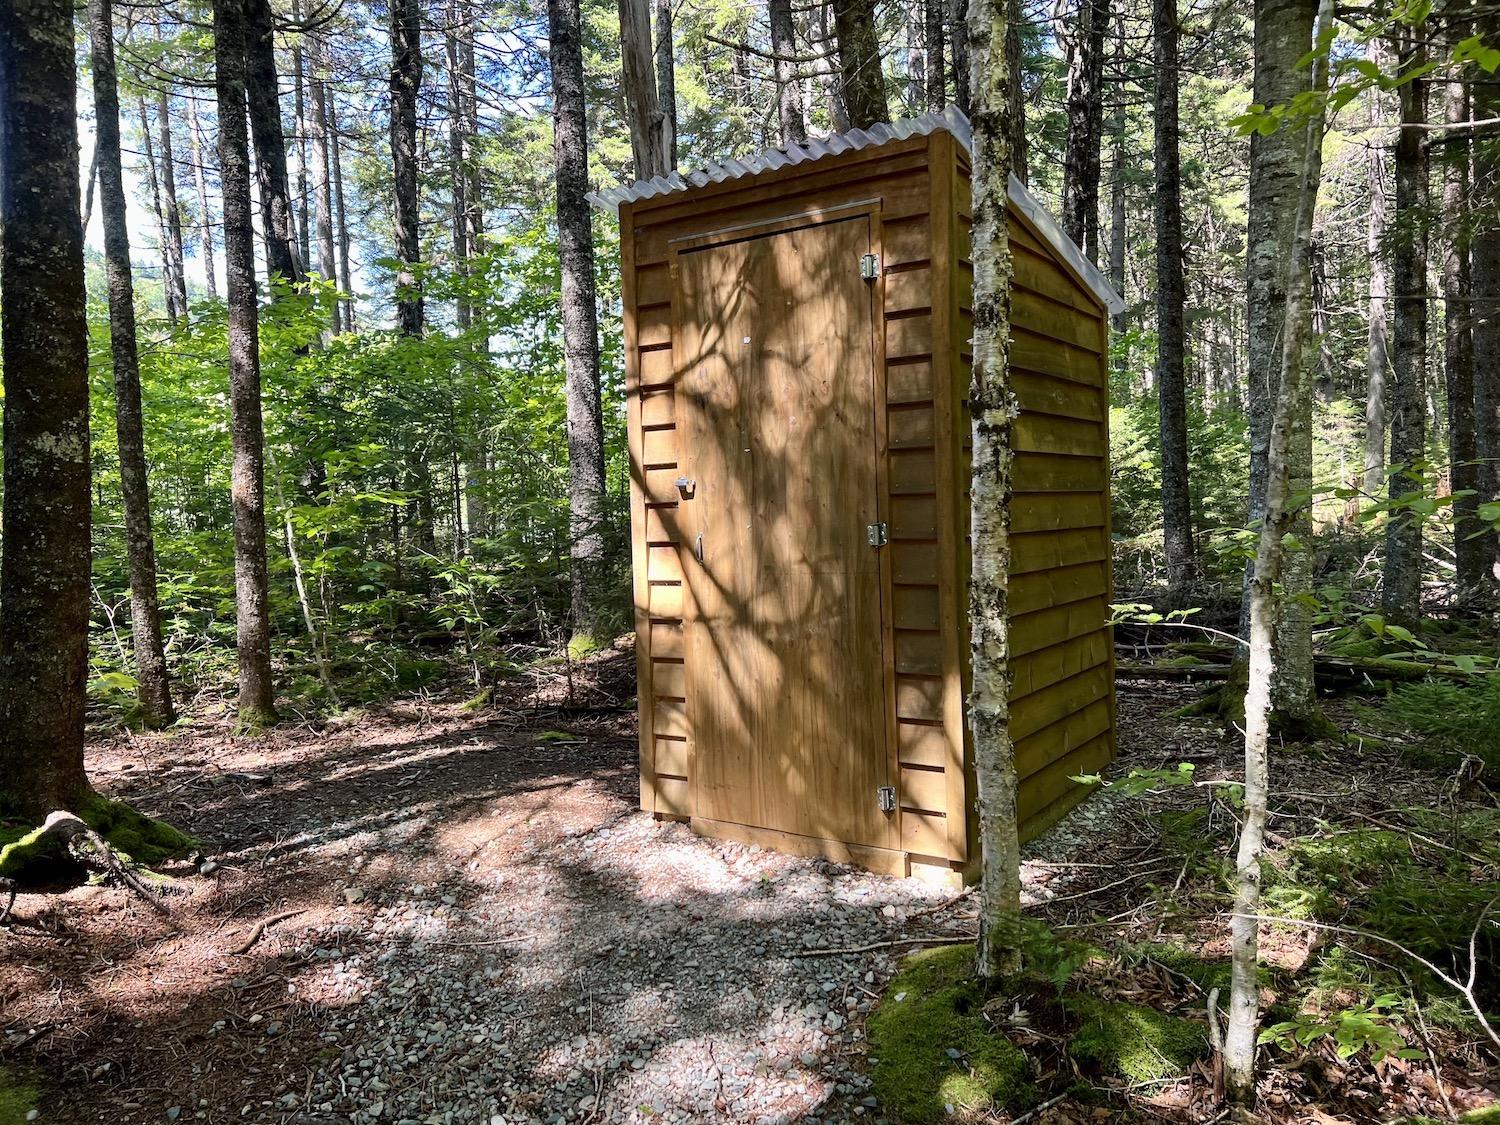 This outhouse is at Black Hole along the Upper Salmon River trail in Fundy National Park in New Brunswick.